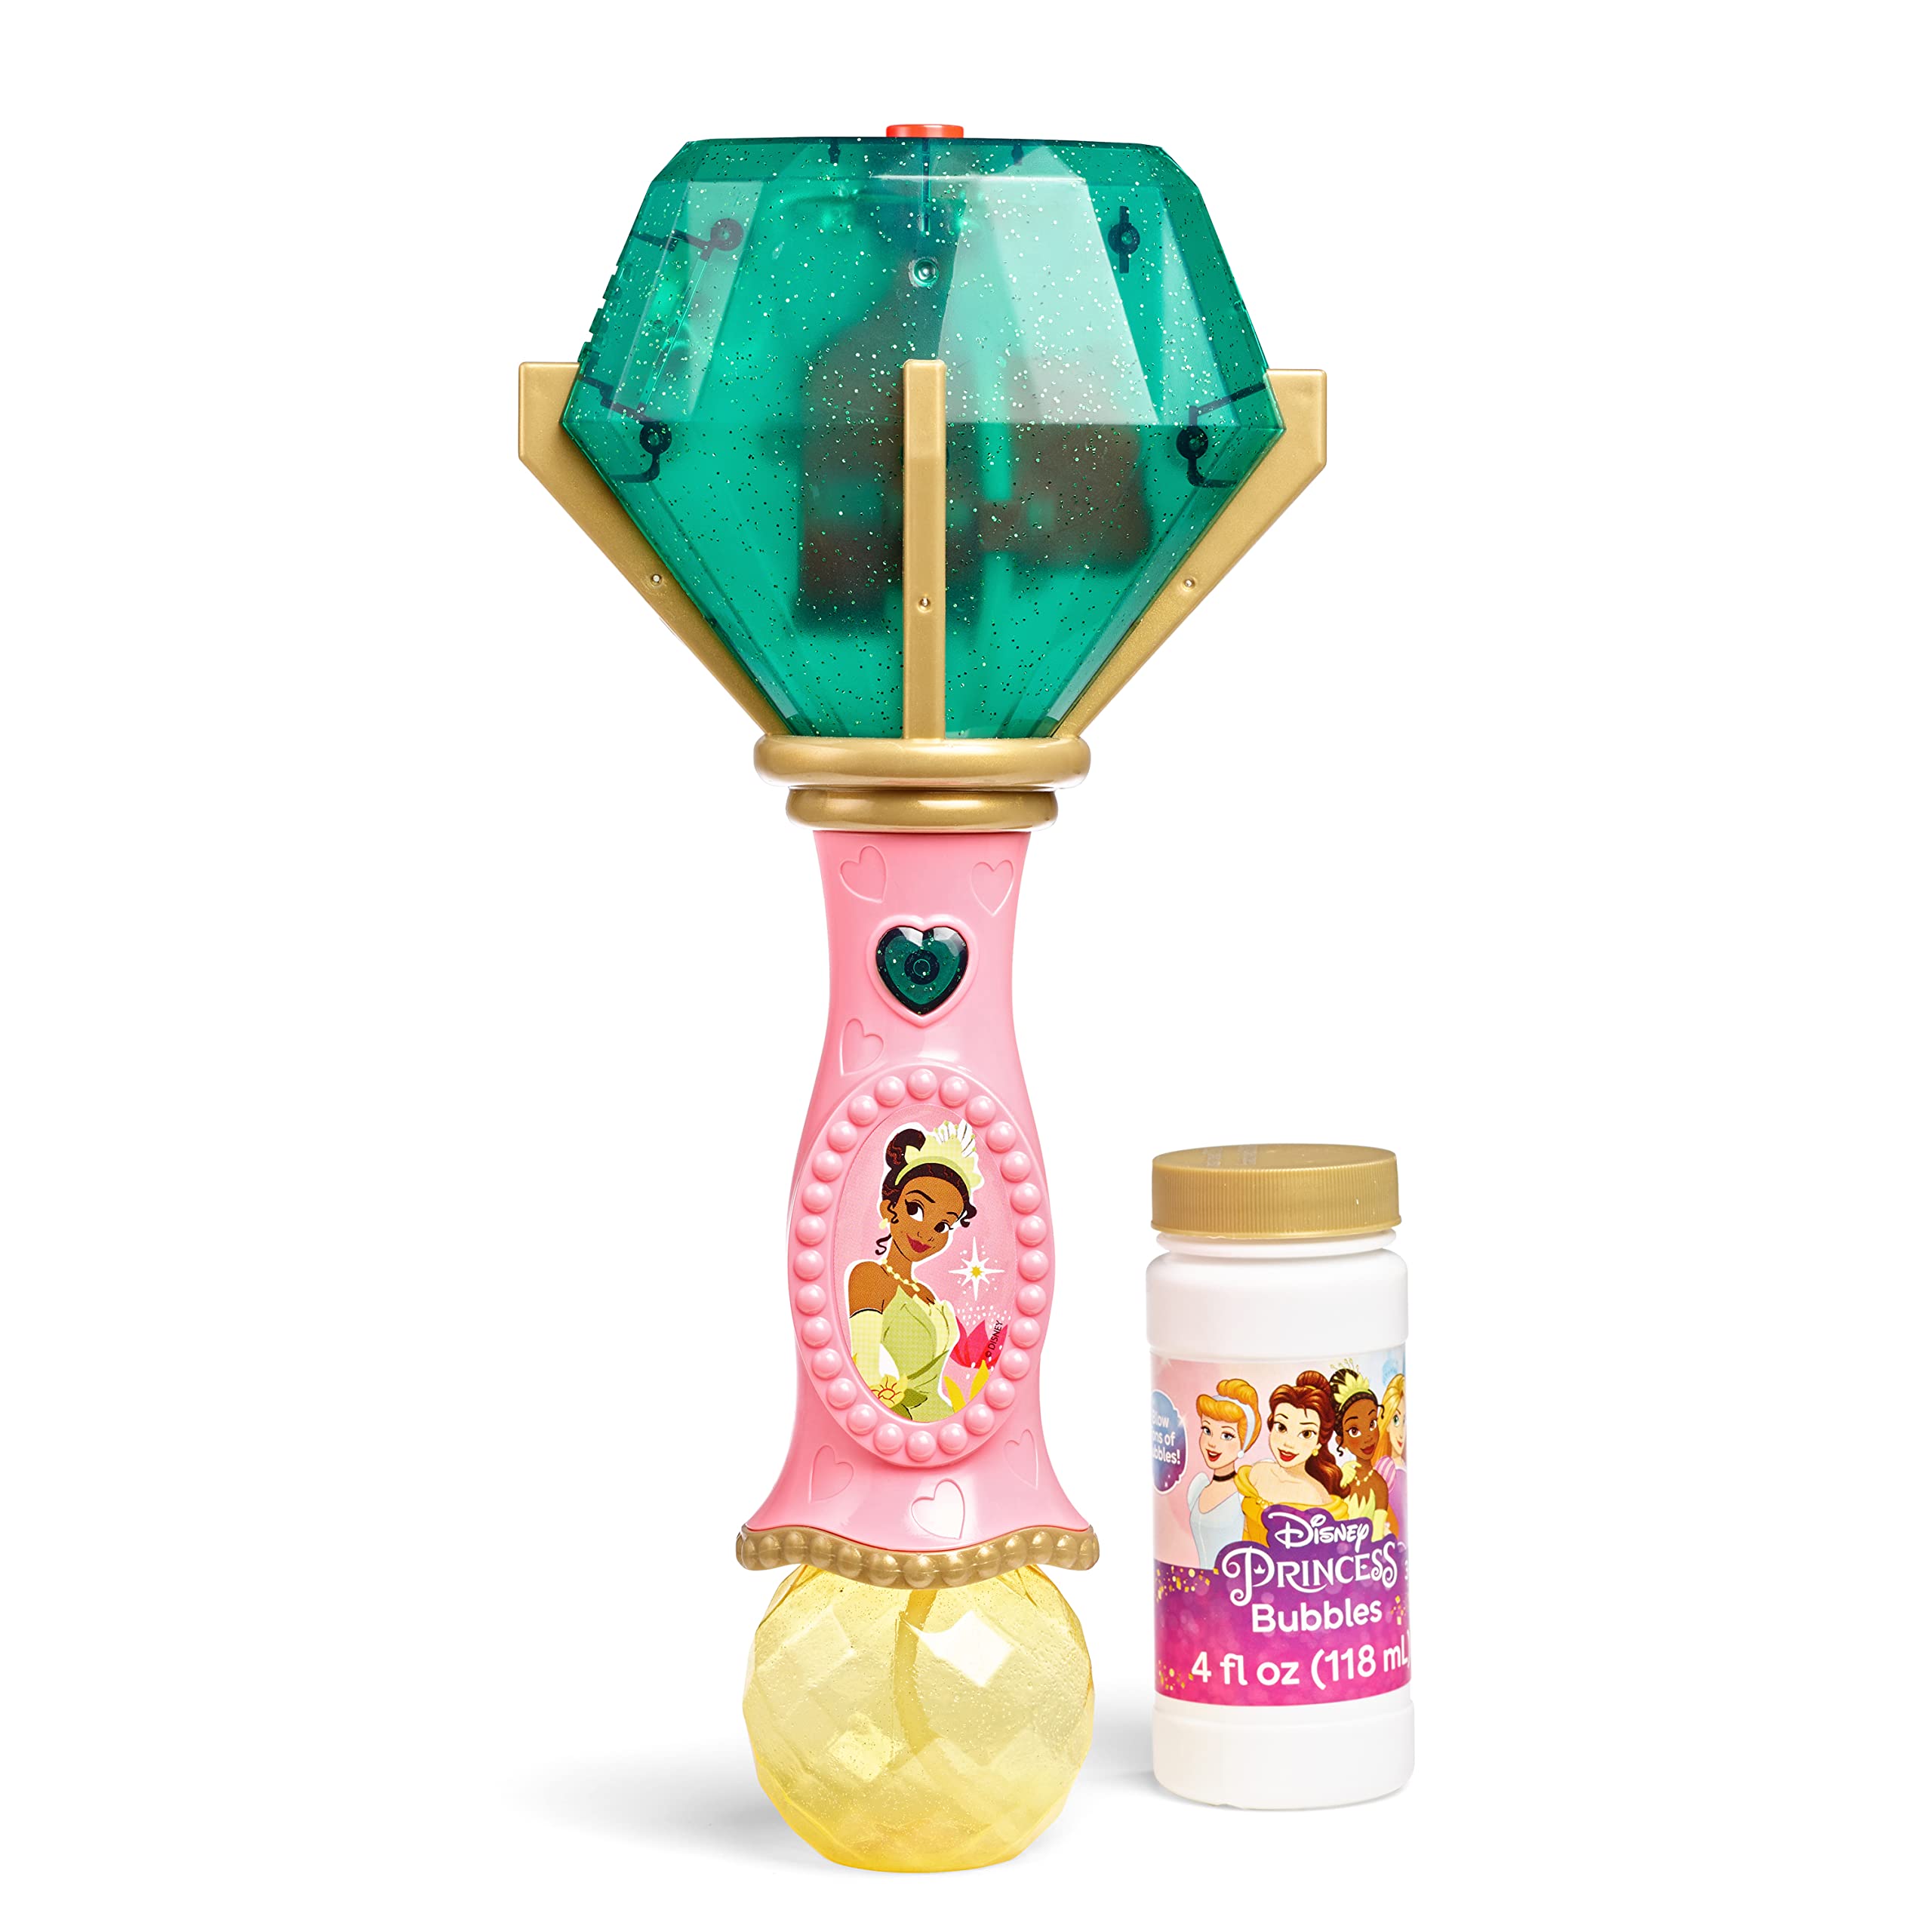 Little Kids Disney Princess and The Frog Tiana Light and Sound Musical Bubble Wand, Includes Bubble Solution, Multi (20522)